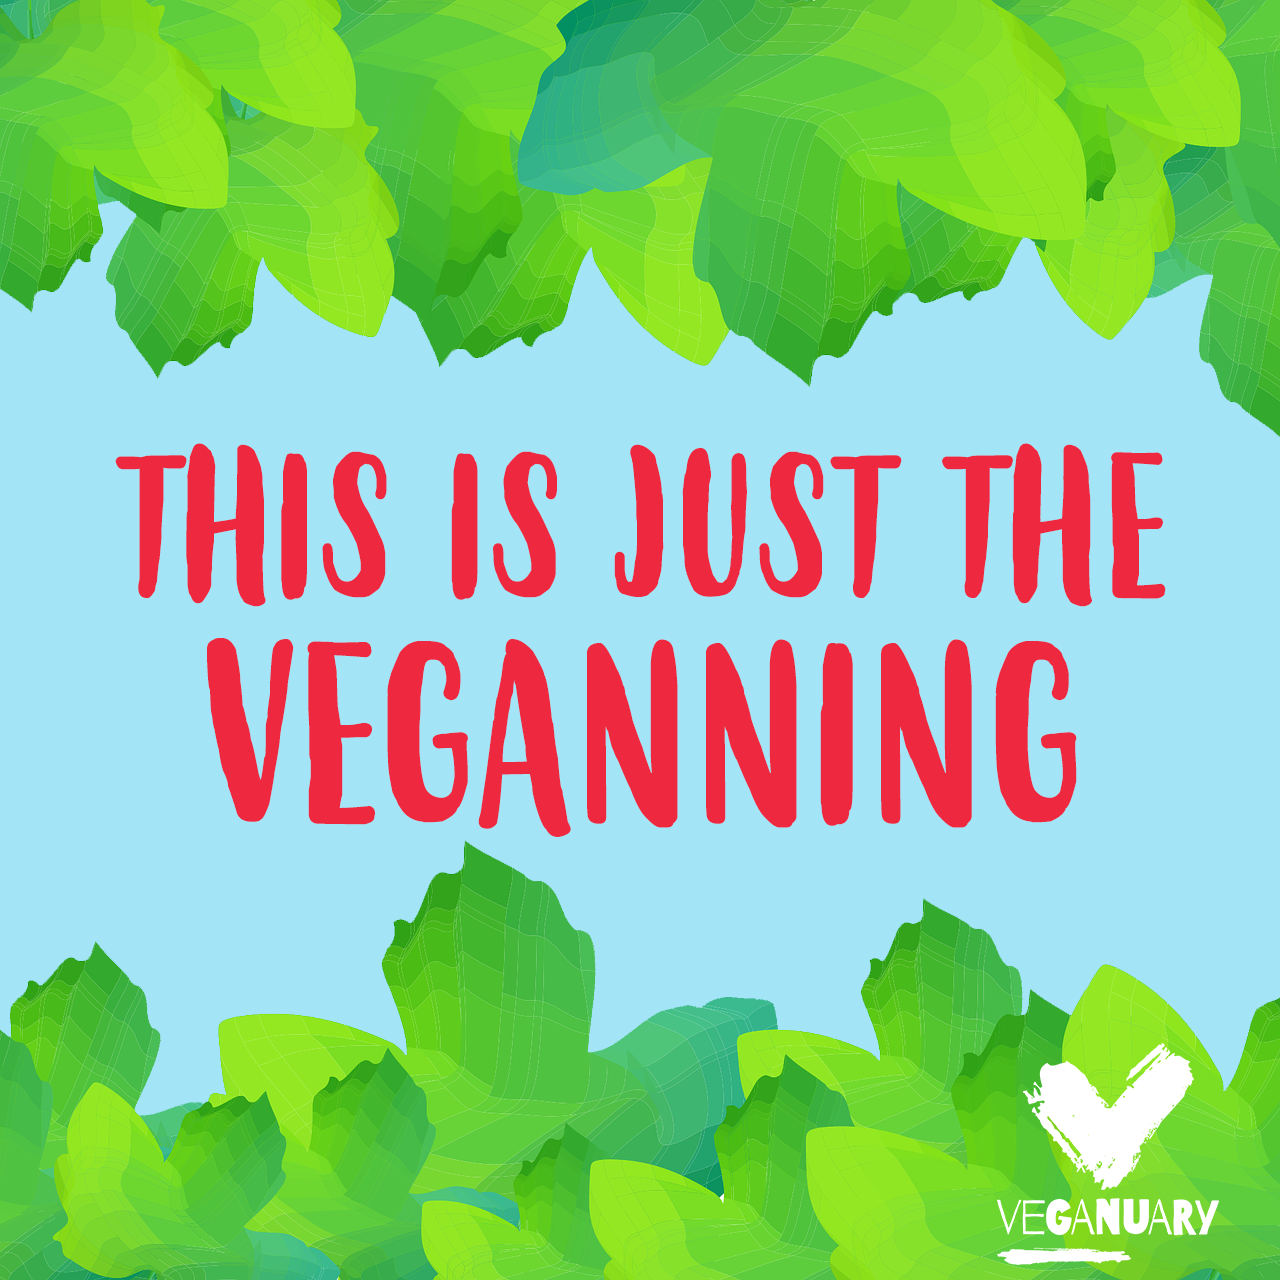 Veganuary say this is the "Veganning"